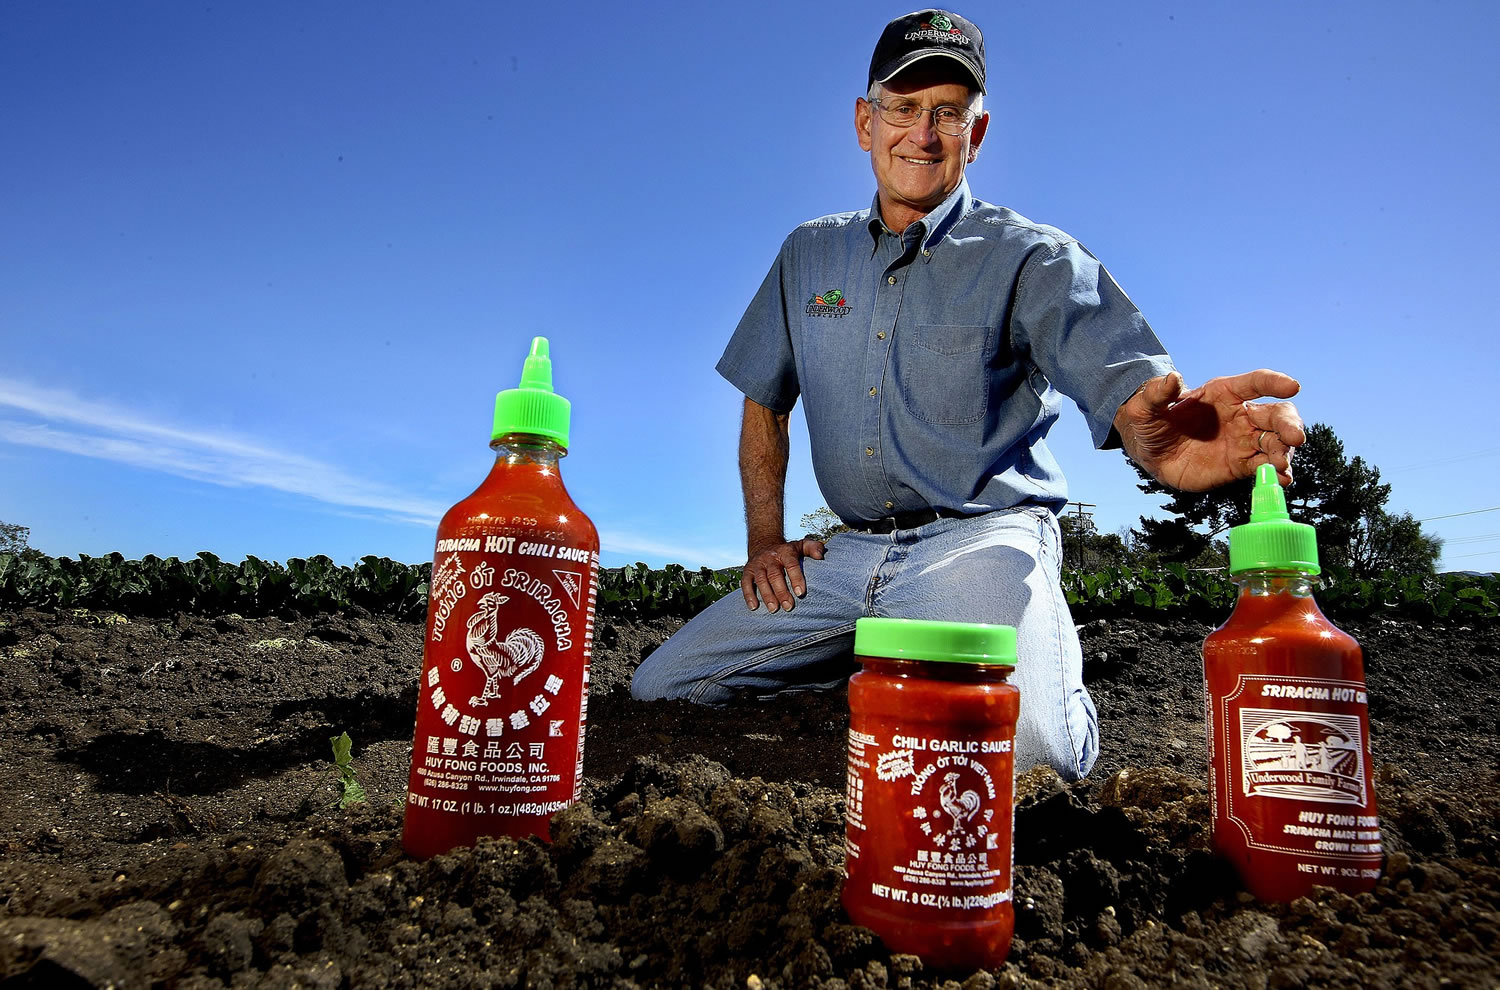 Craig Underwood grows 2,000 acres of peppers for Huy Fong Foods, maker of Sriracha sauce, in Moorpark, Calif.